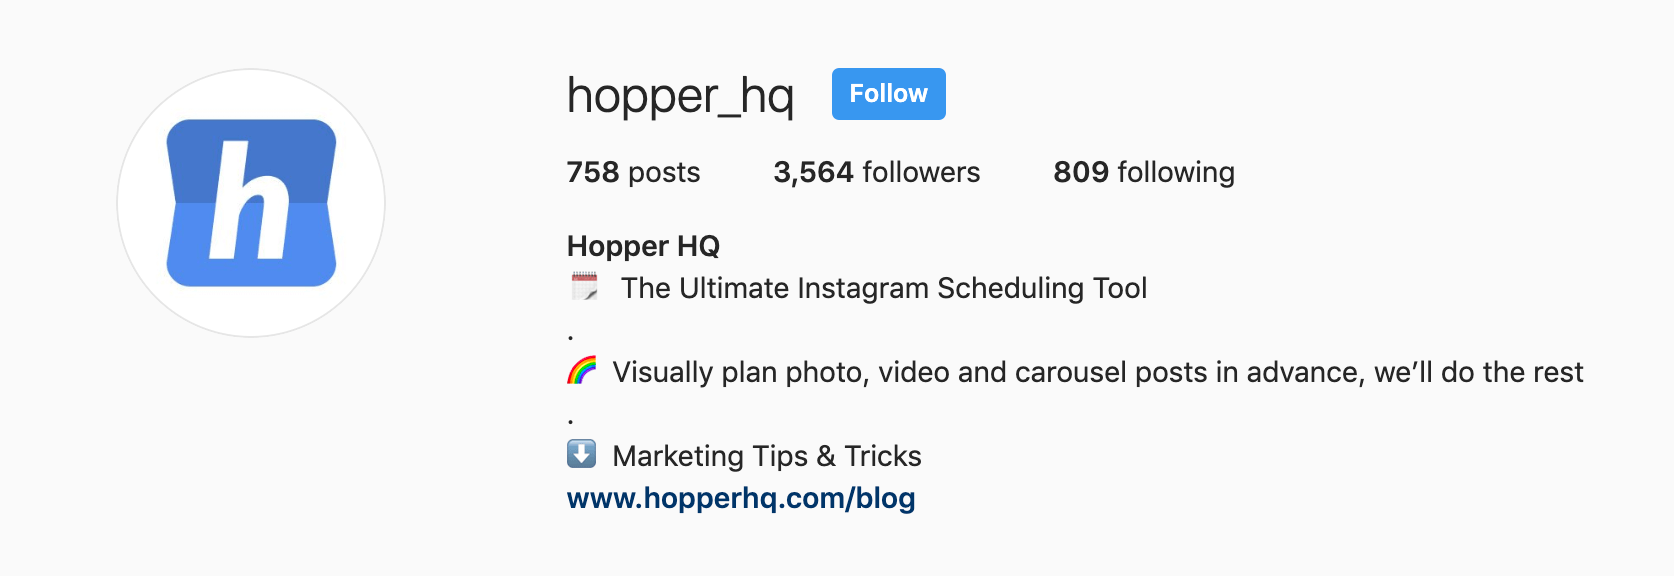 How To Use Instagram For Business A Simple Guide Hopper Hq